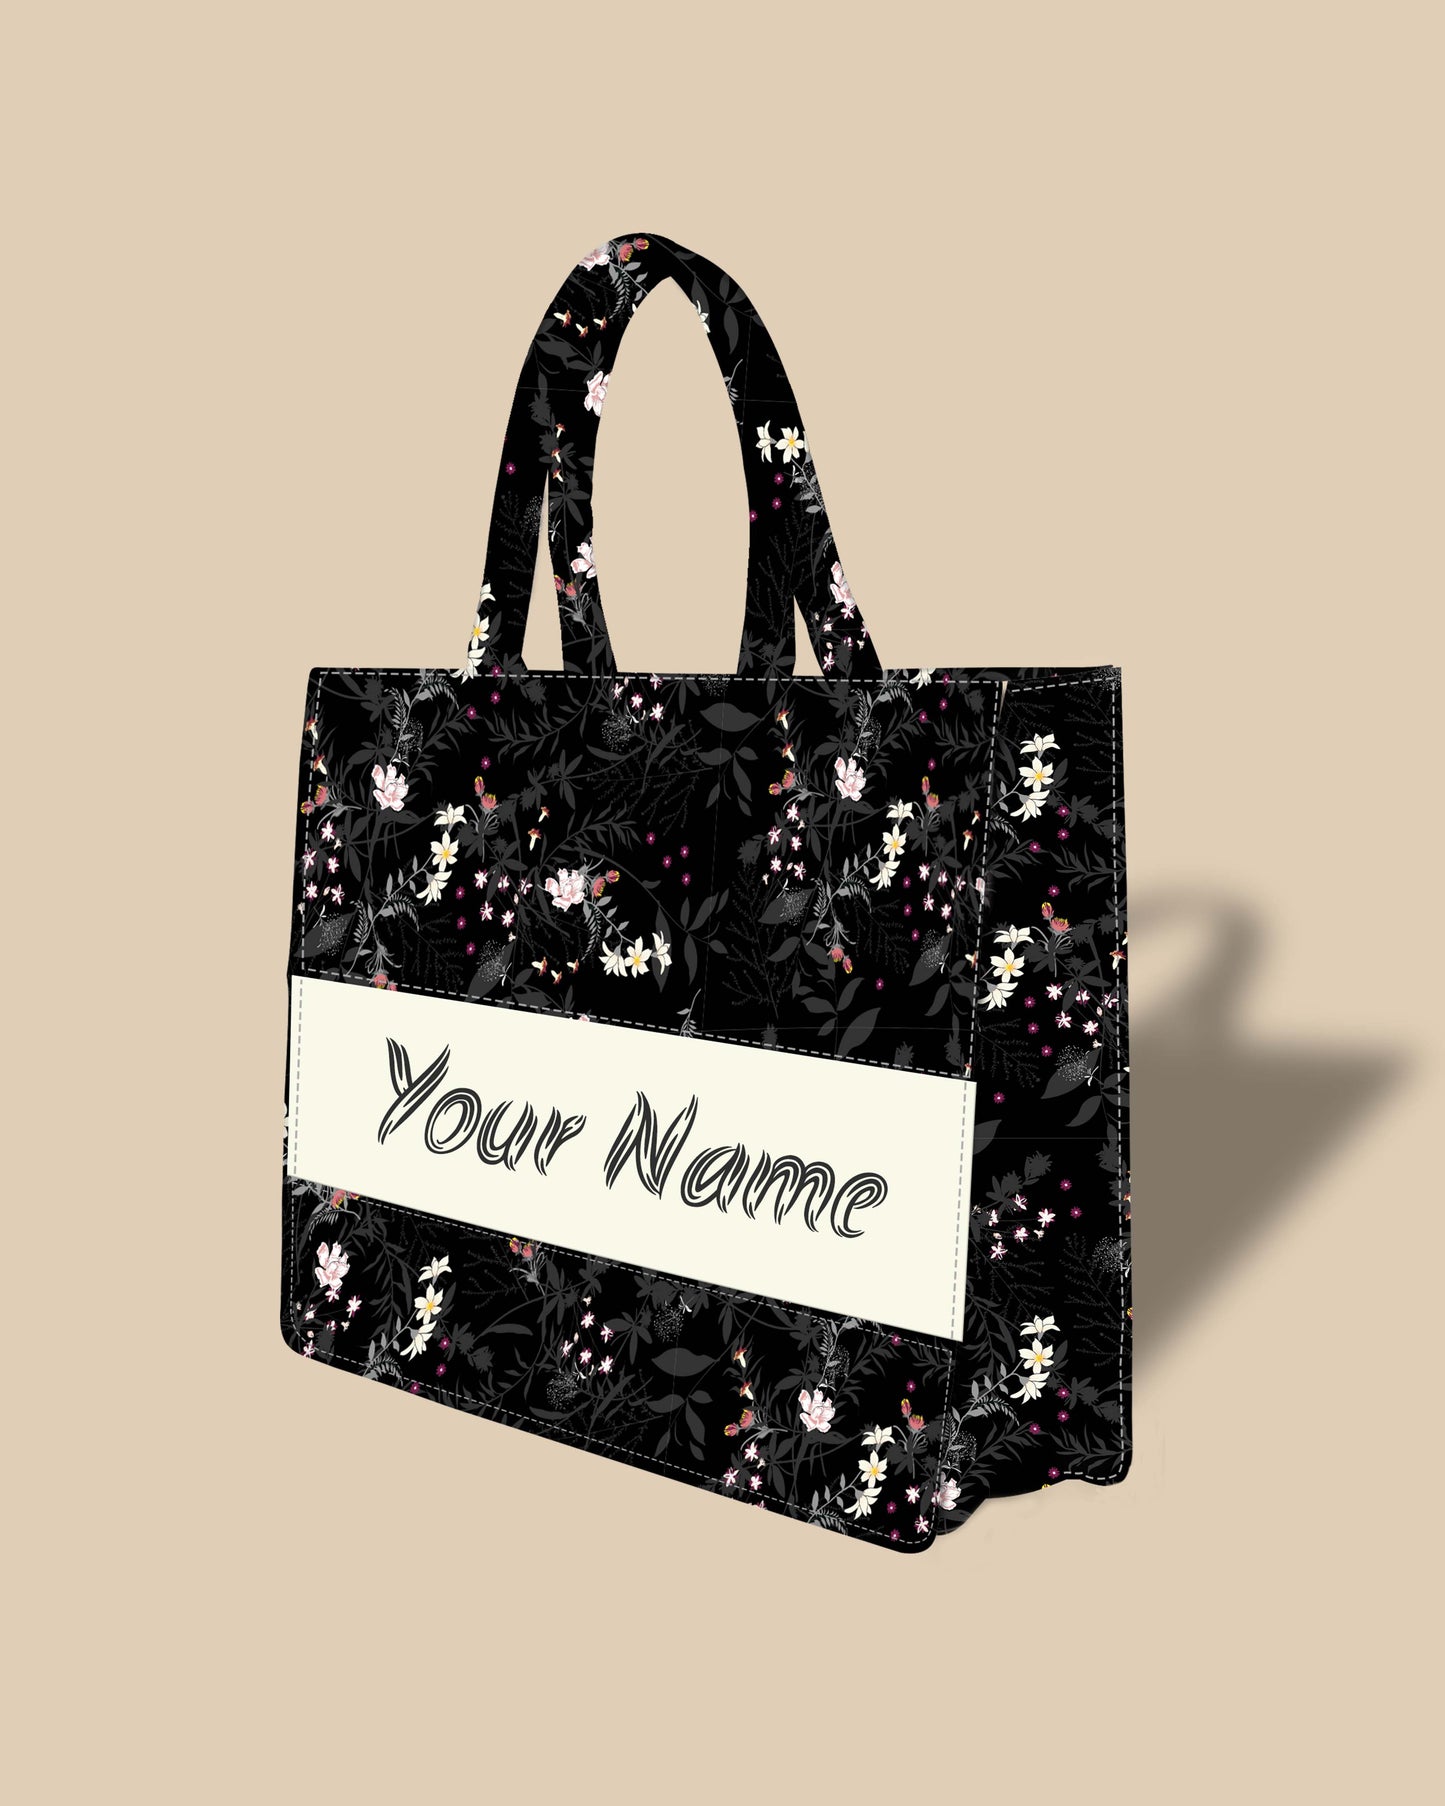 Customized Tote Bag Designed with Dark Leaves Botanical Flowers